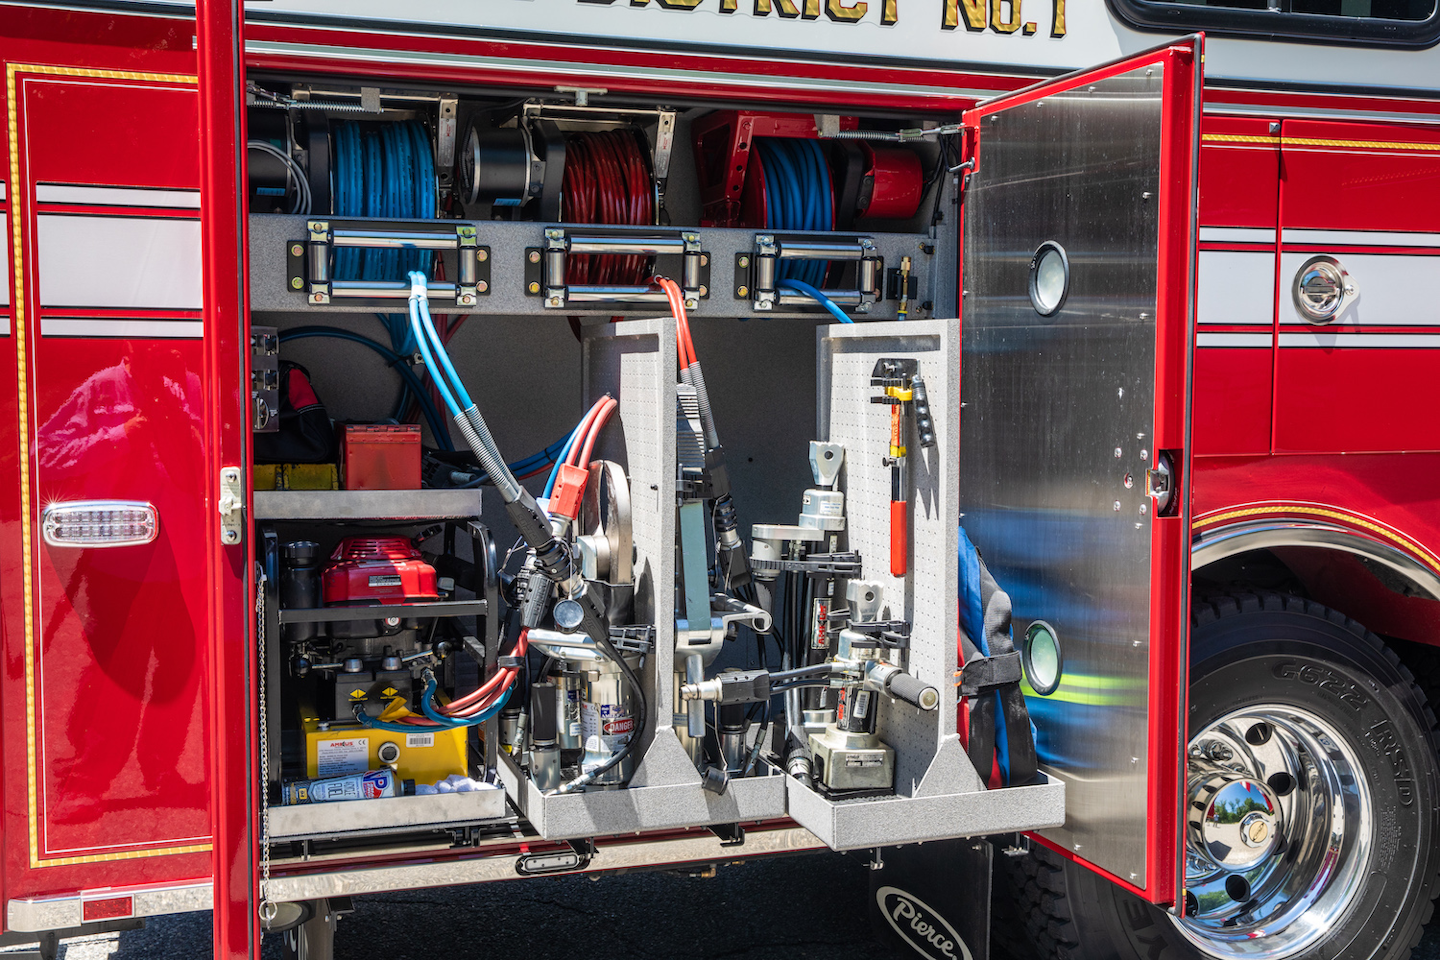 Fire Truck Firefighter Rescue Rig Tool Compartments Design Access